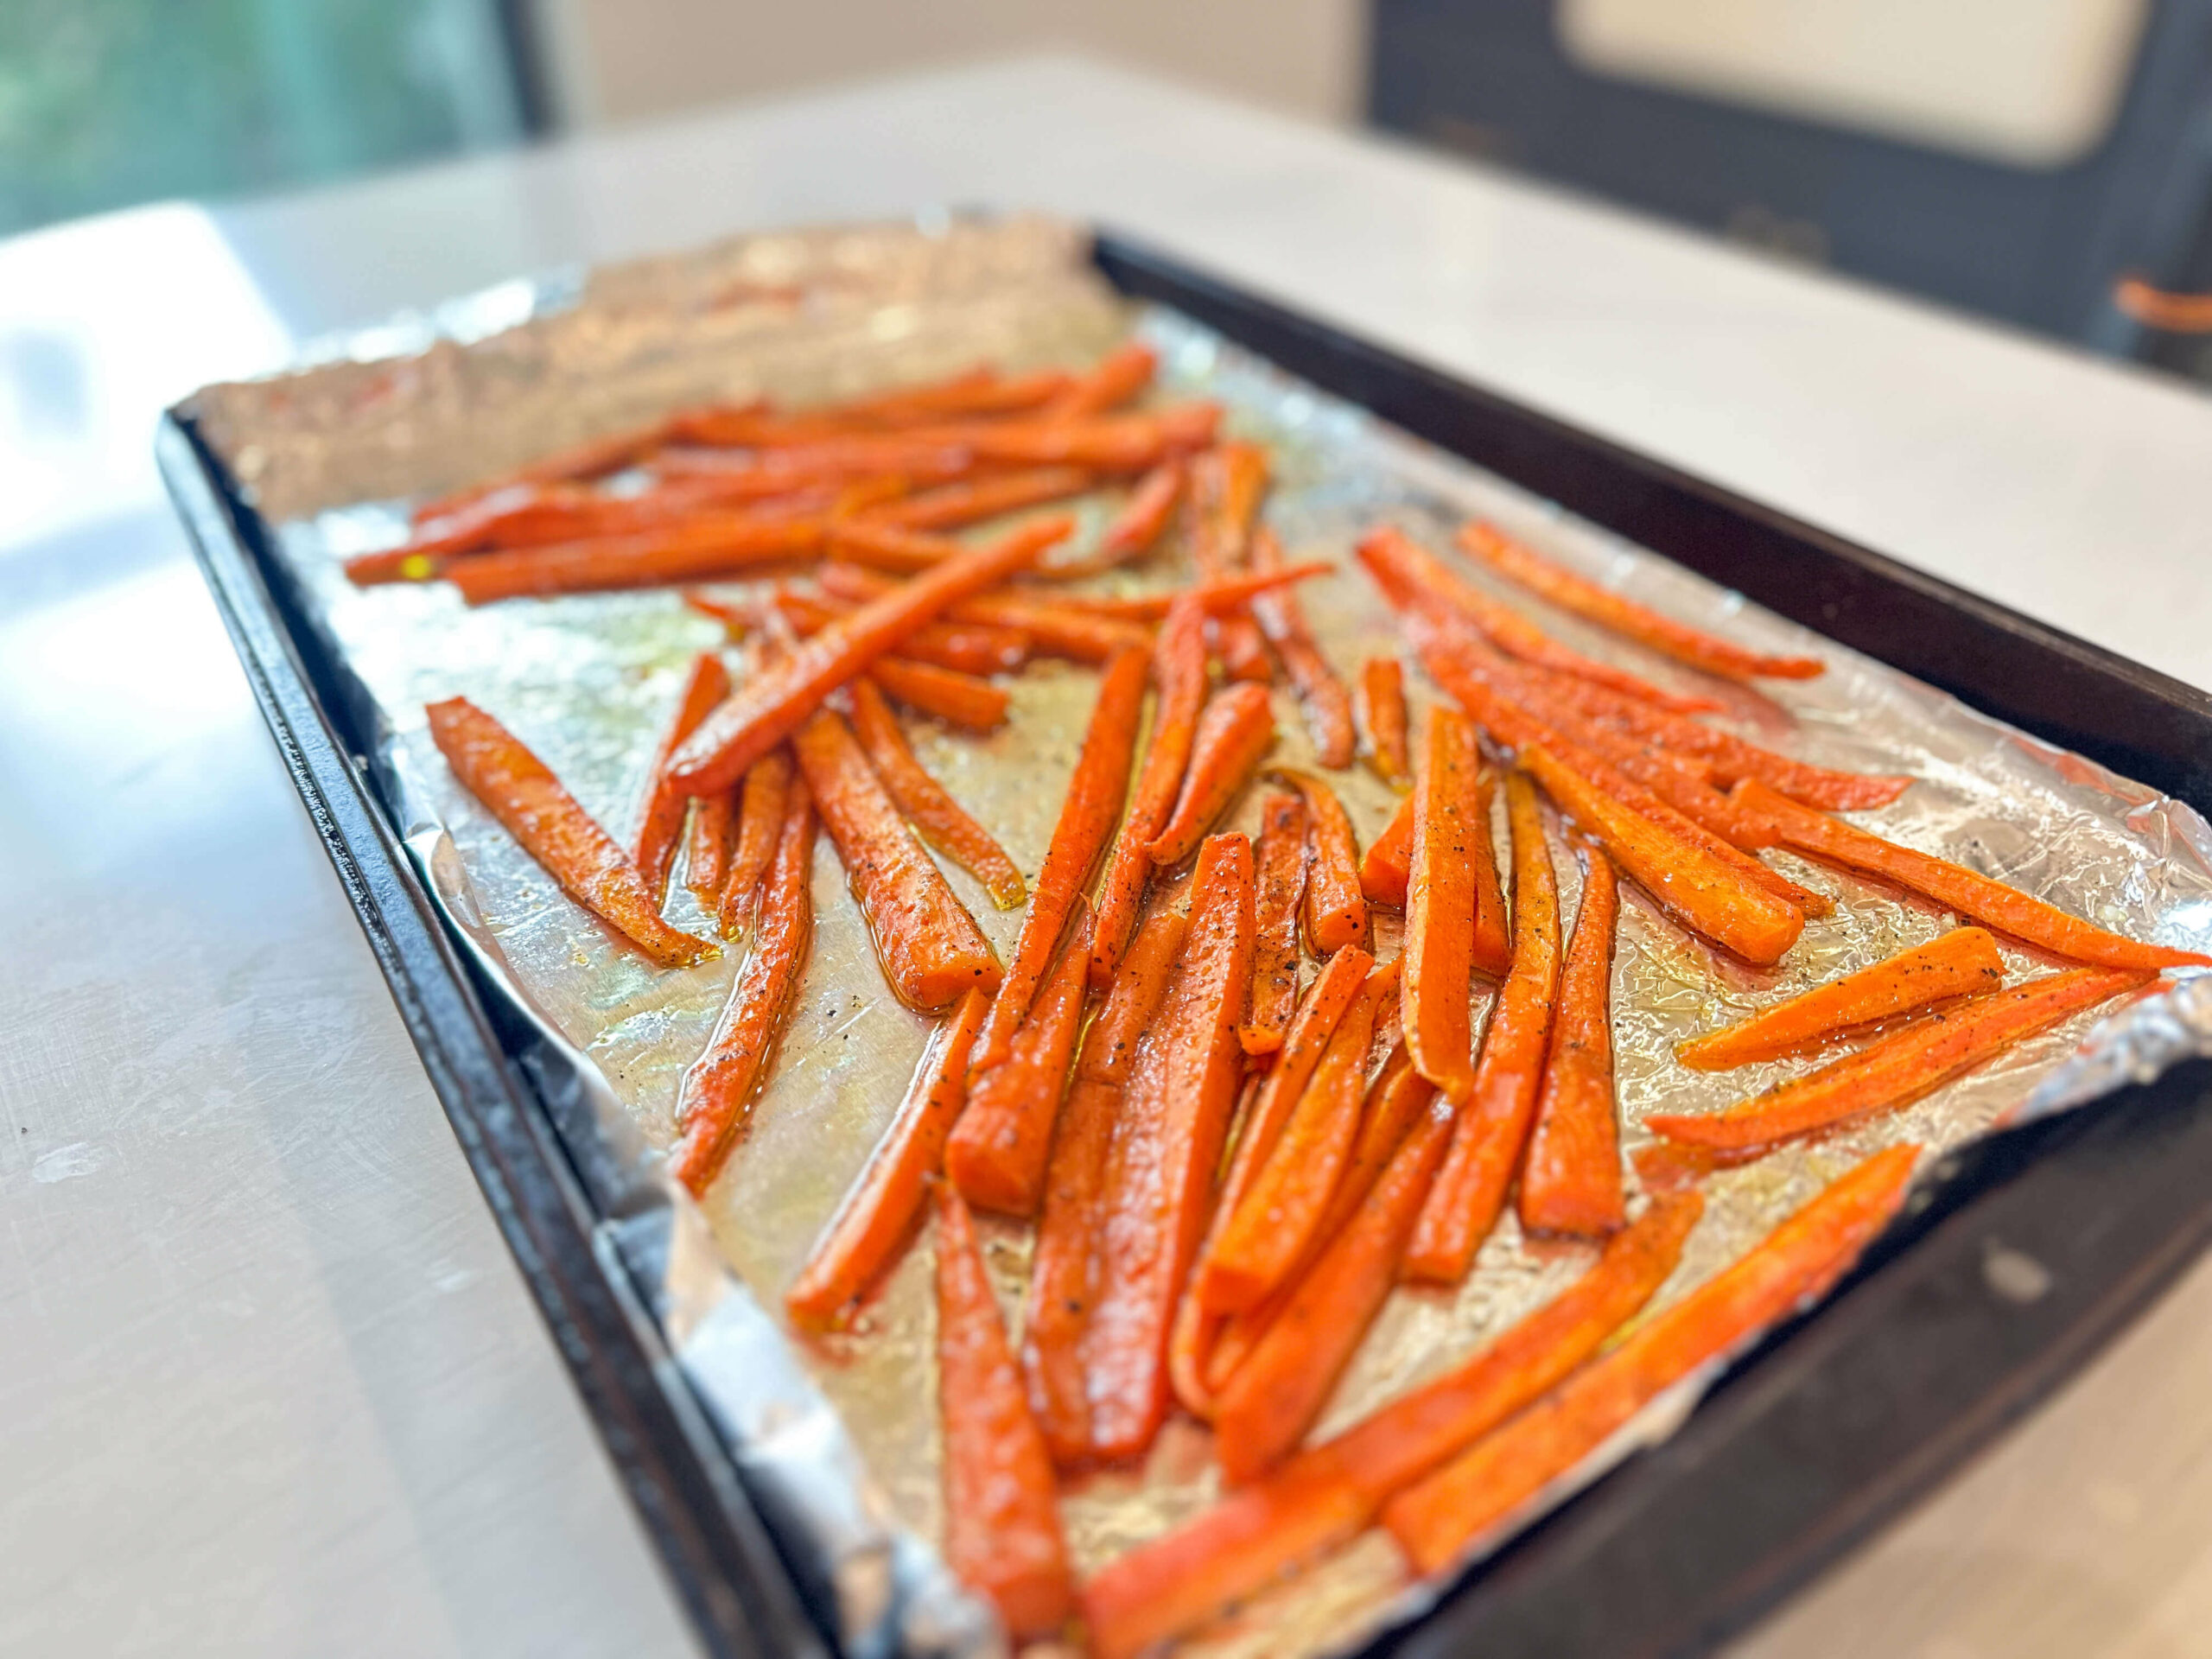 Black pepper Roasted carrots cooked without the garlic maple syrup mixture.